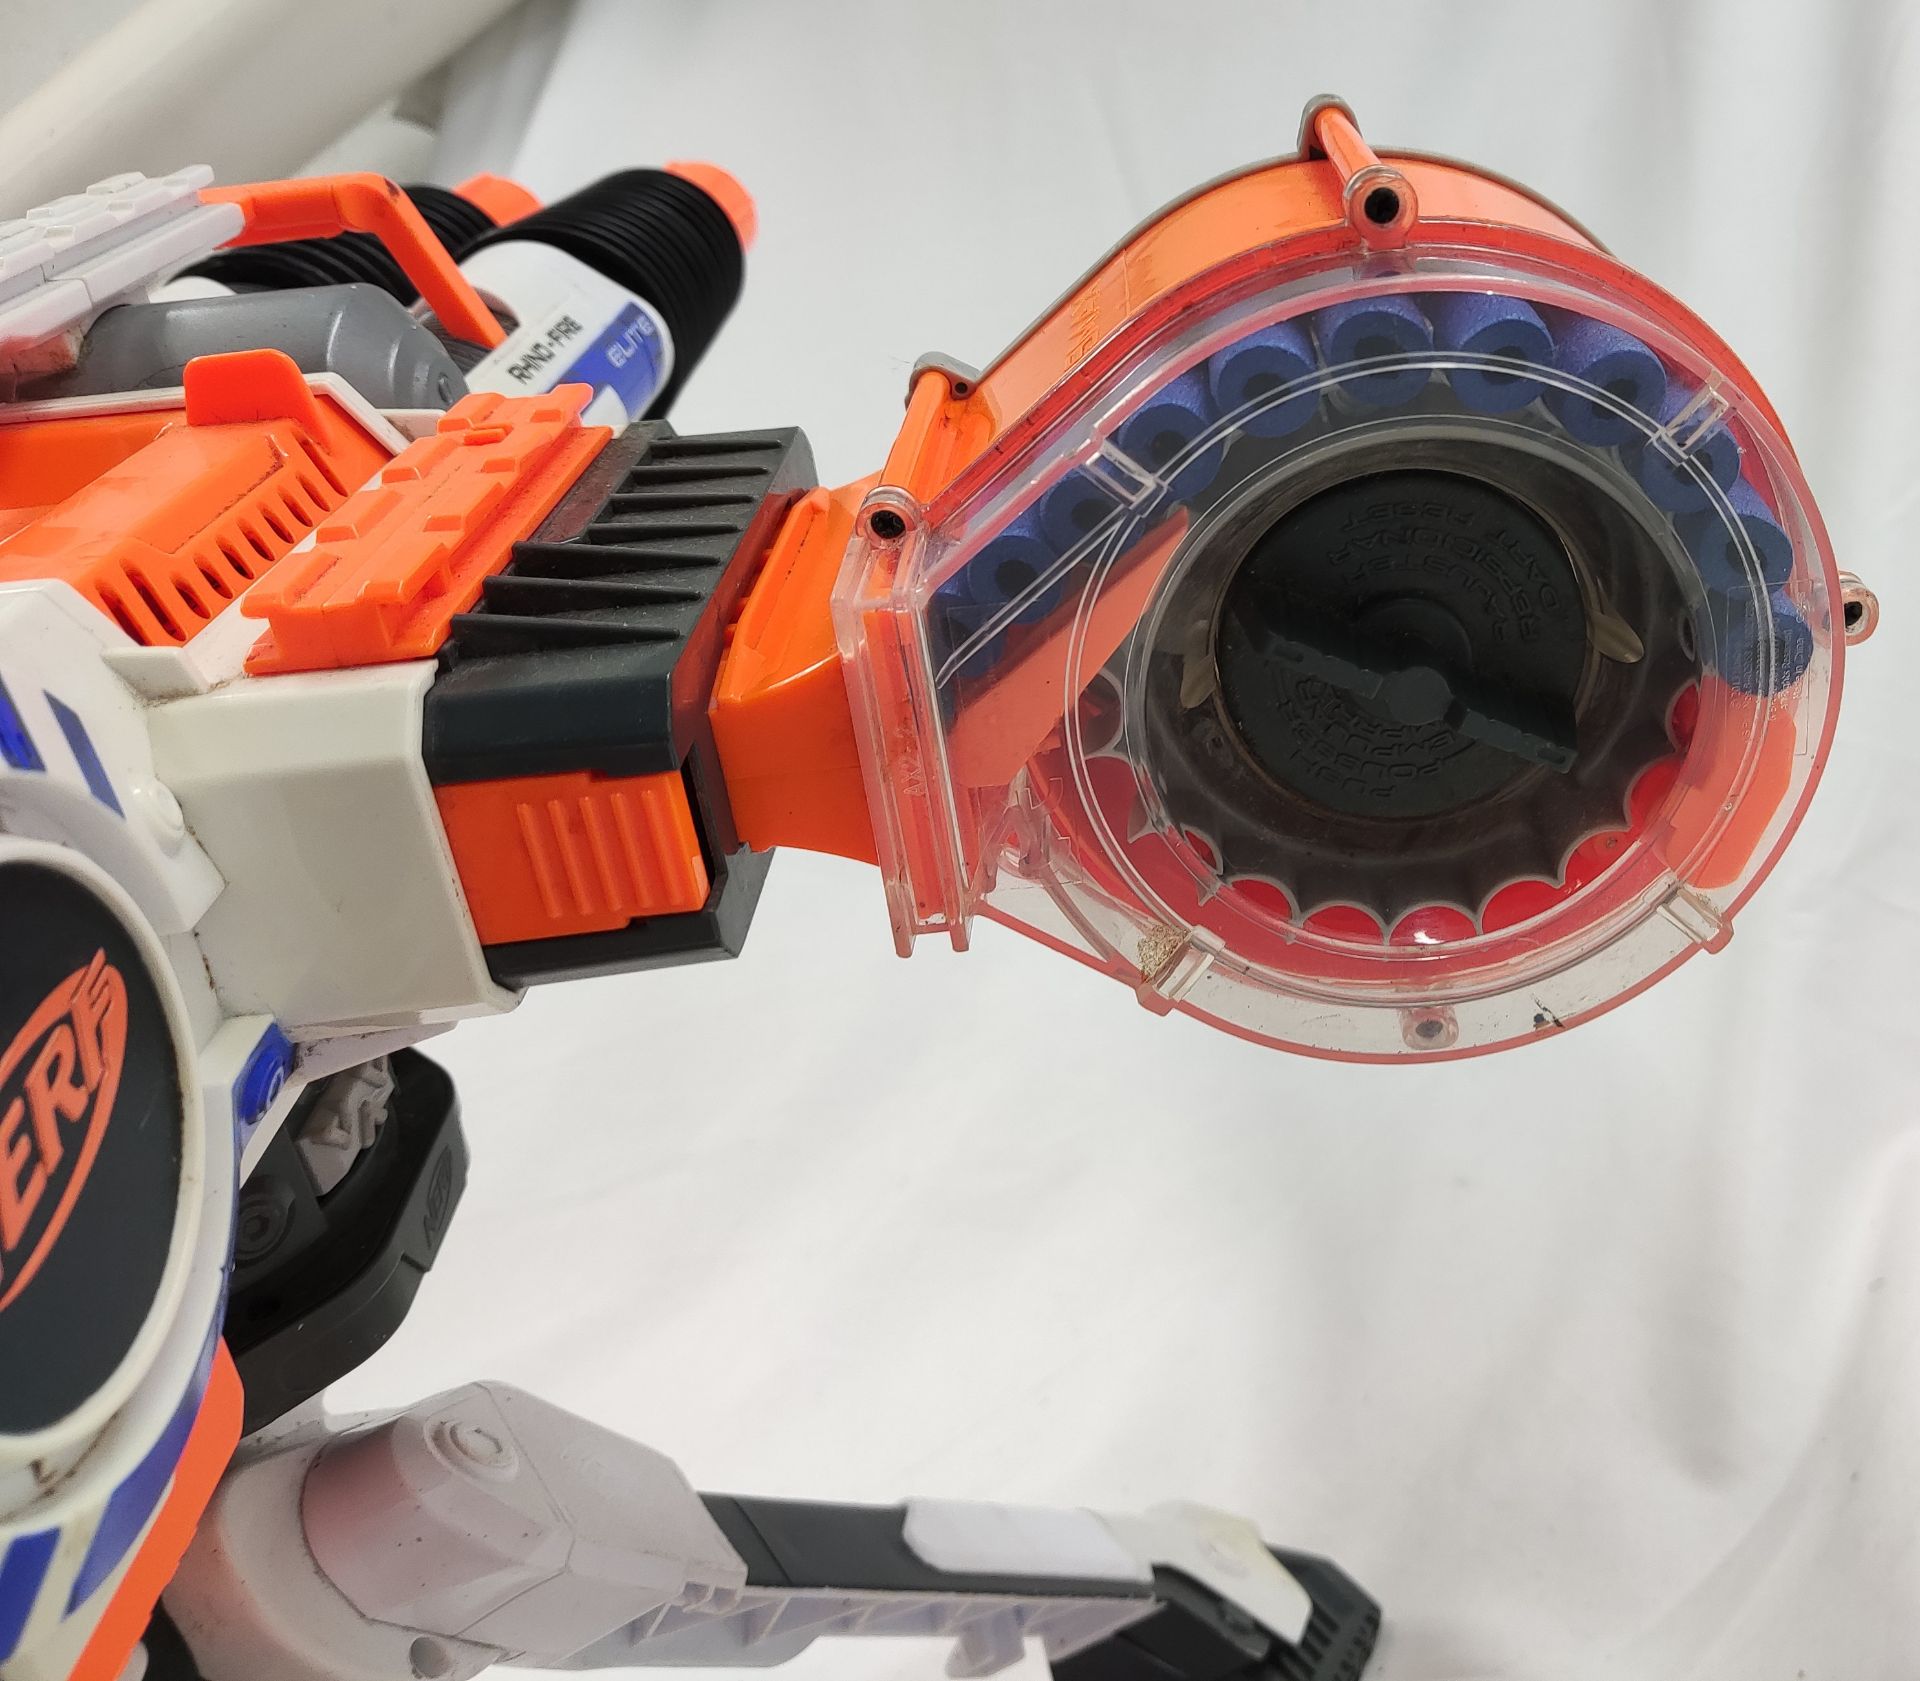 1 x Nerf Rhino-Fire Electric Nerf Gun with Moving Barrels - Used - CL444 - NO VAT ON THE HAMMER - - Image 6 of 12